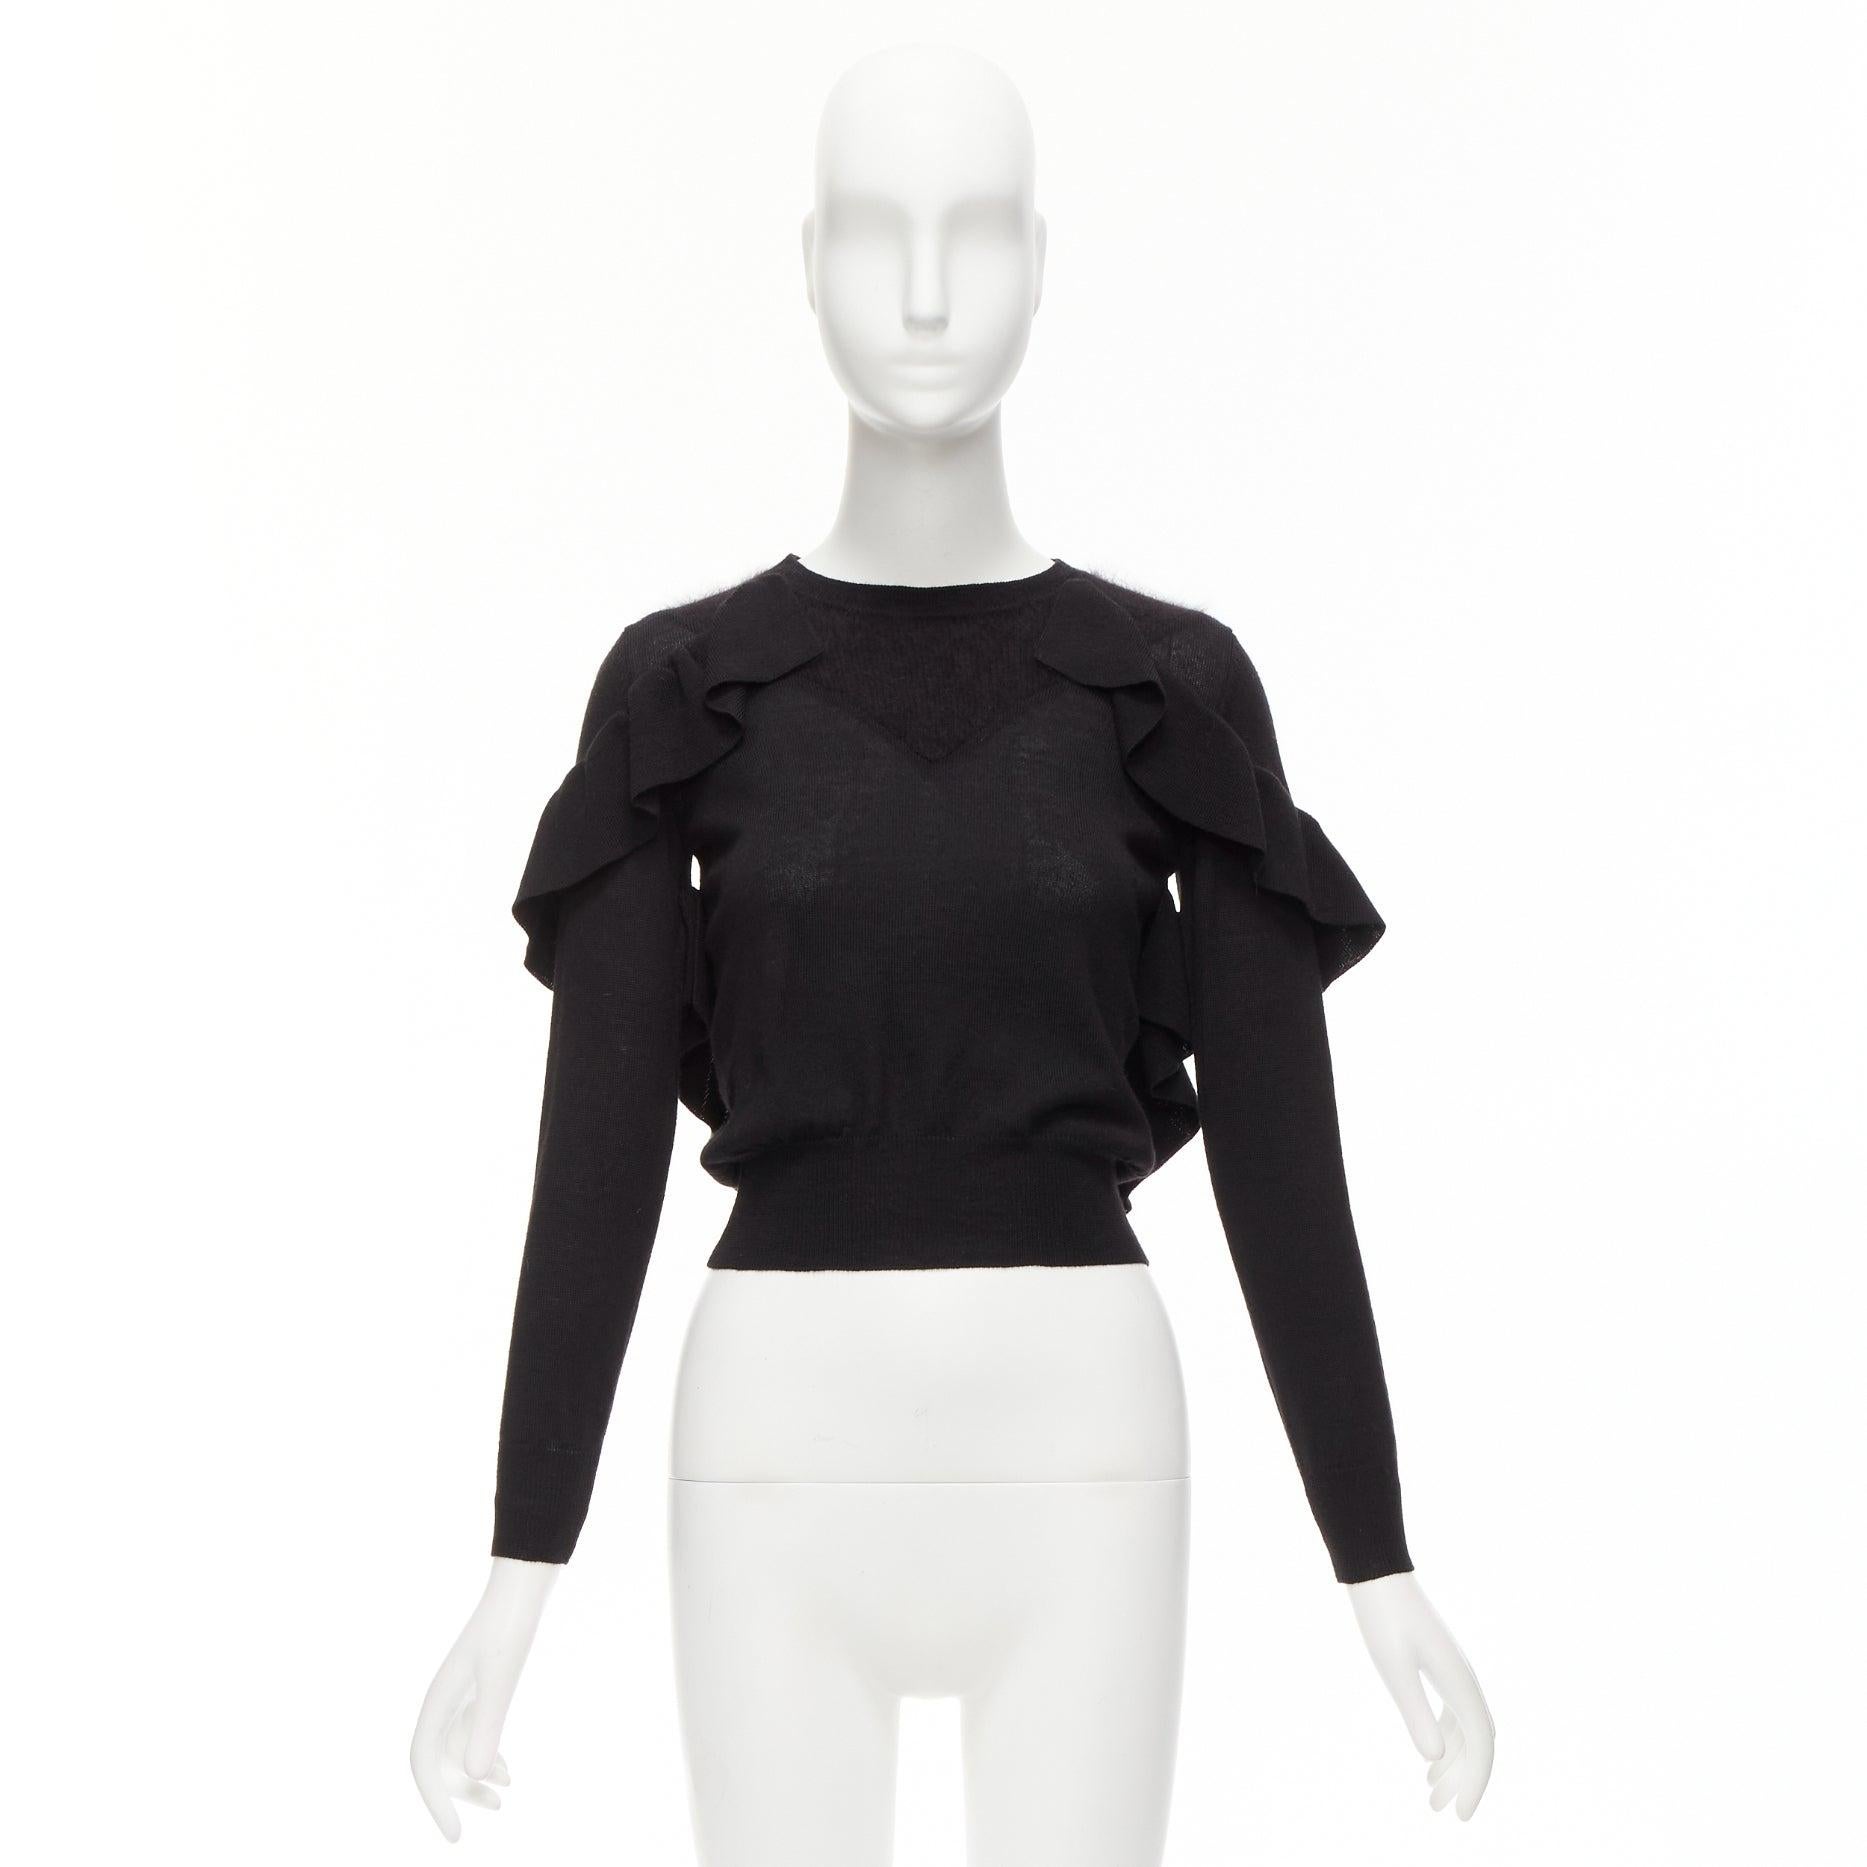 VIKTOR & ROLF black virgin wool silk cashmere sides ruffle cropped sweater XS
Reference: AAWC/A01094
Brand: Viktor & Rolf
Material: Virgin Wool, Silk, Cashmere
Color: Black
Pattern: Solid
Closure: Pullover
Made in: Italy

CONDITION:
Condition: